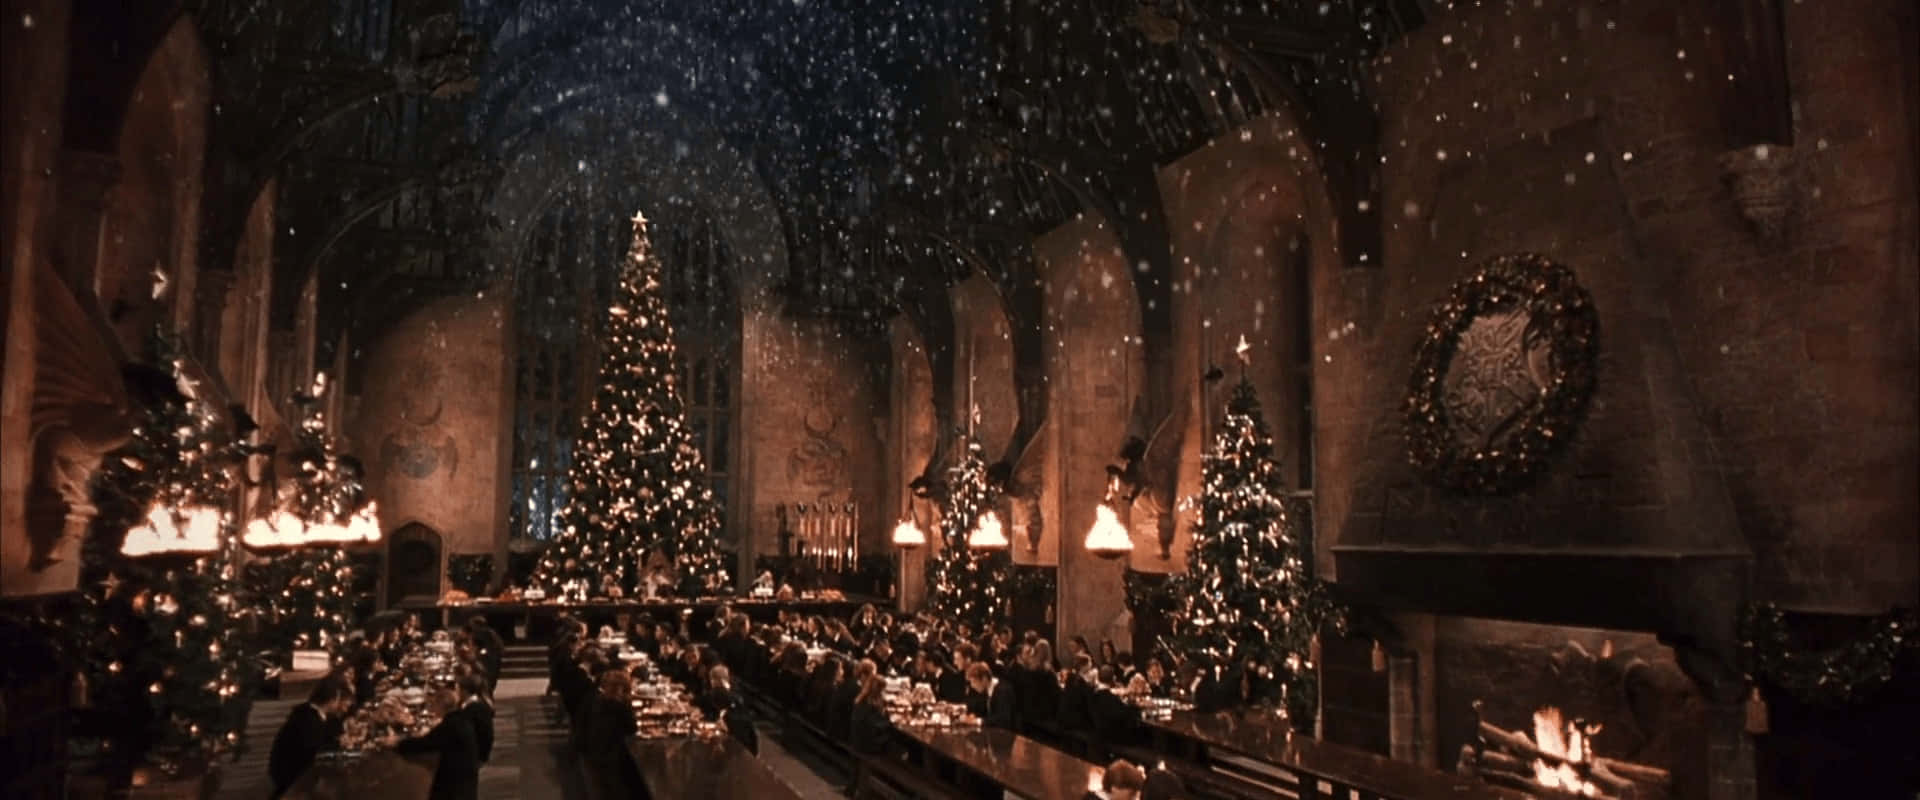 Hogwarts in the snow at night in Christmas wallpaper